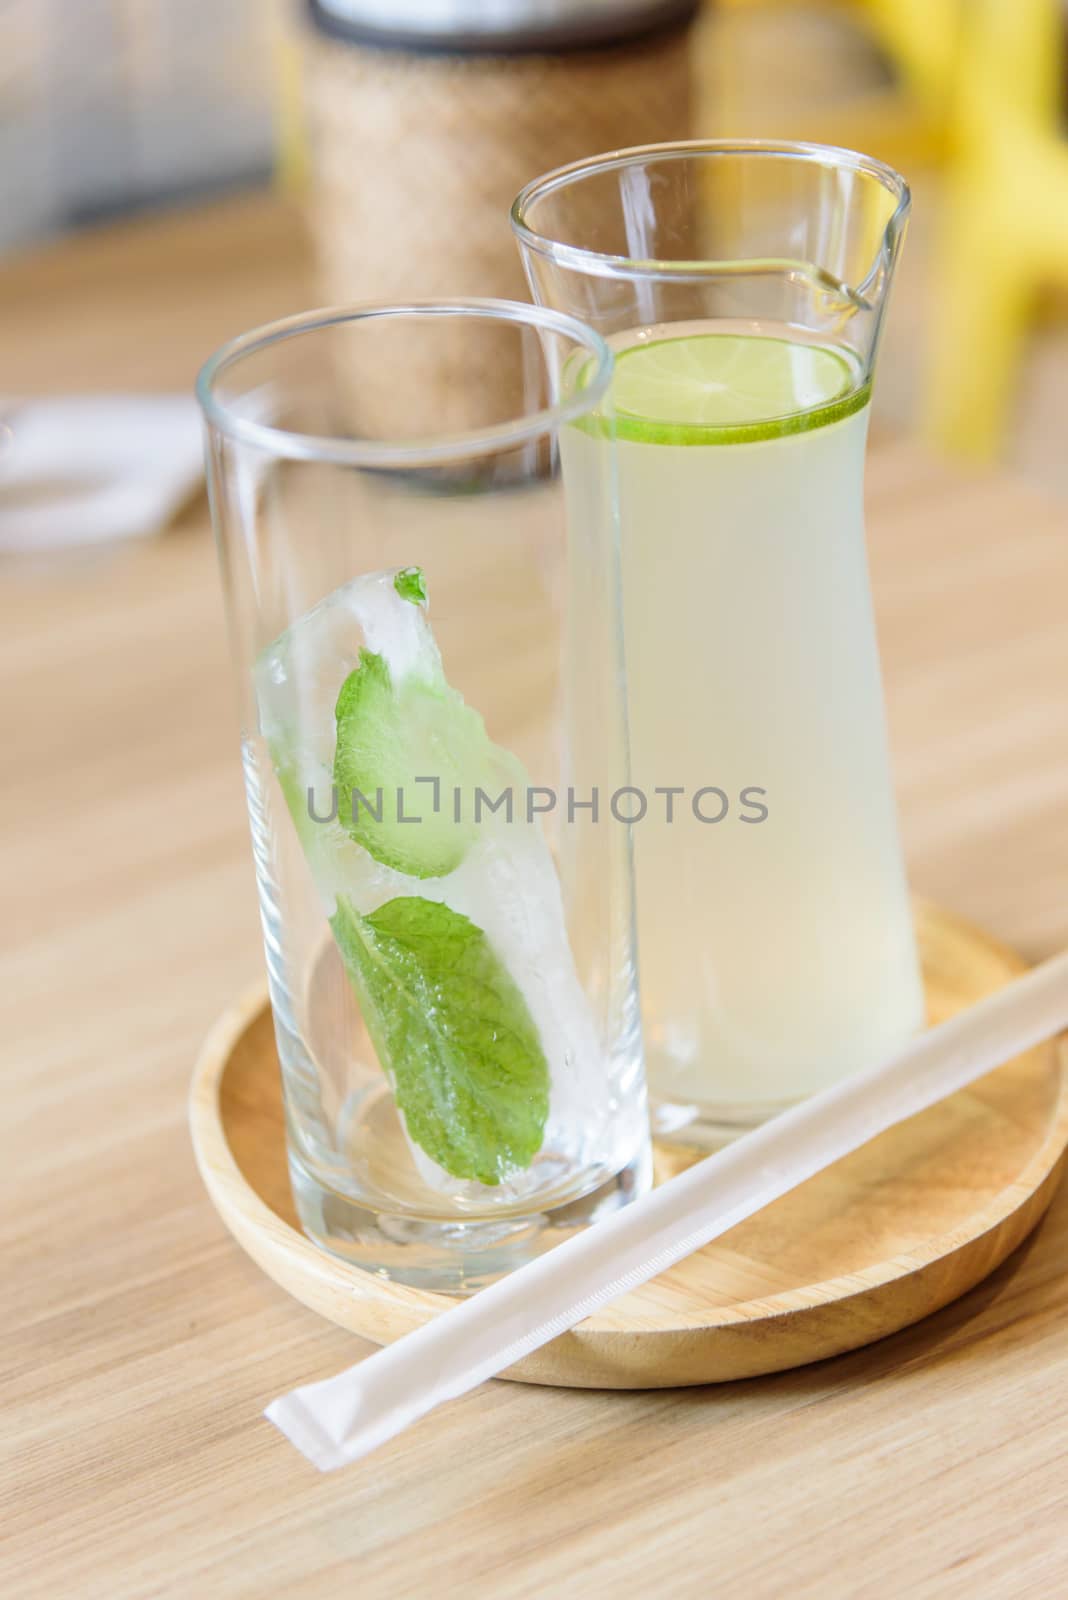 Lemon juice with ice Mint leaves bar in glass